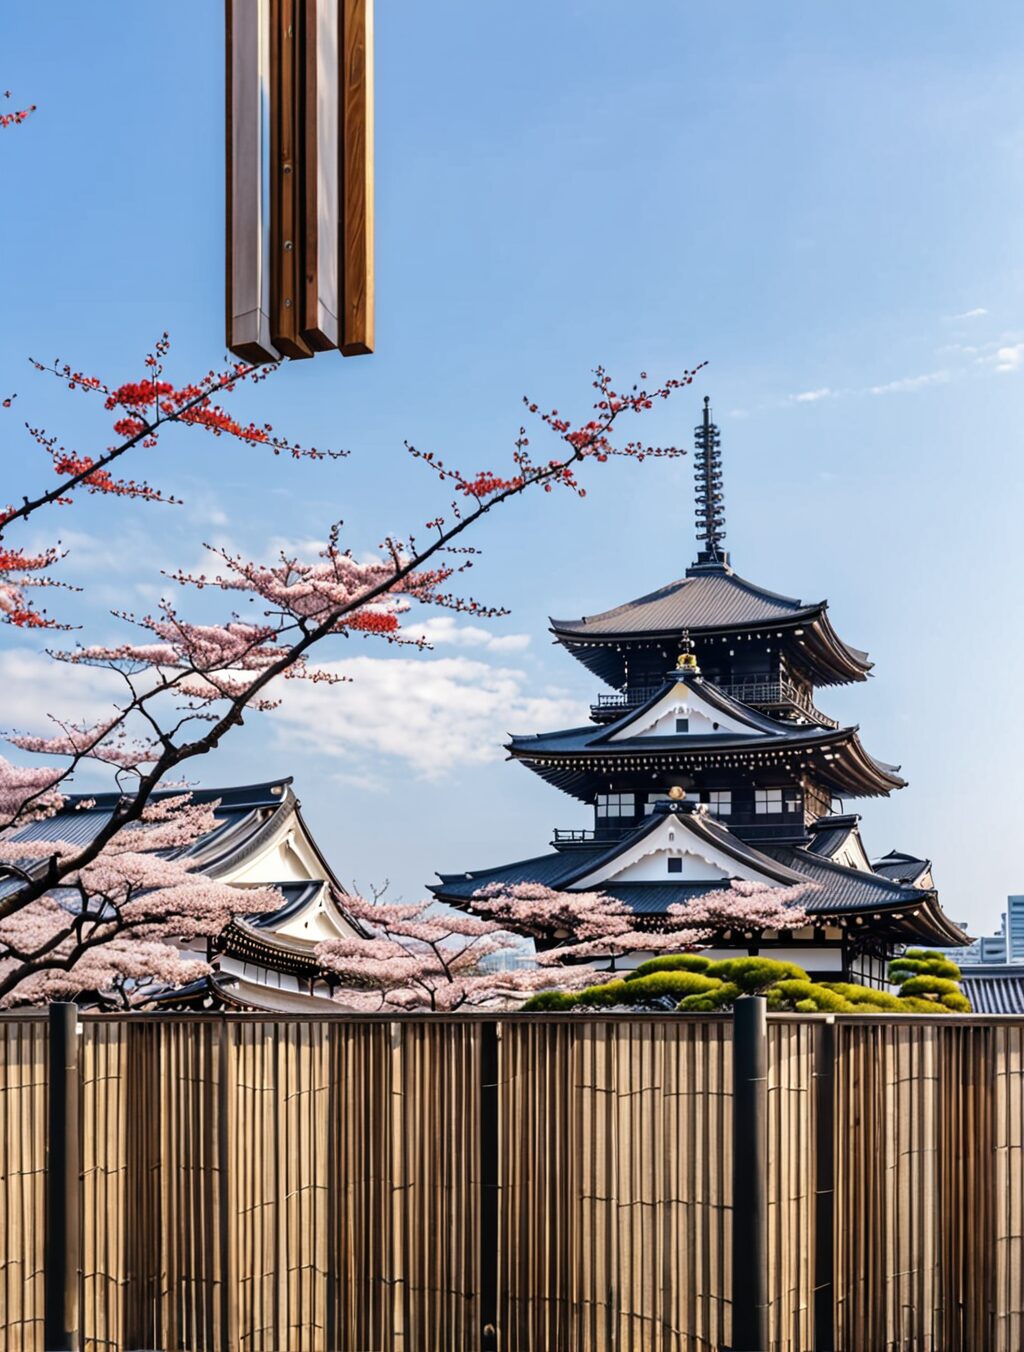 best time to visit osaka and kyoto